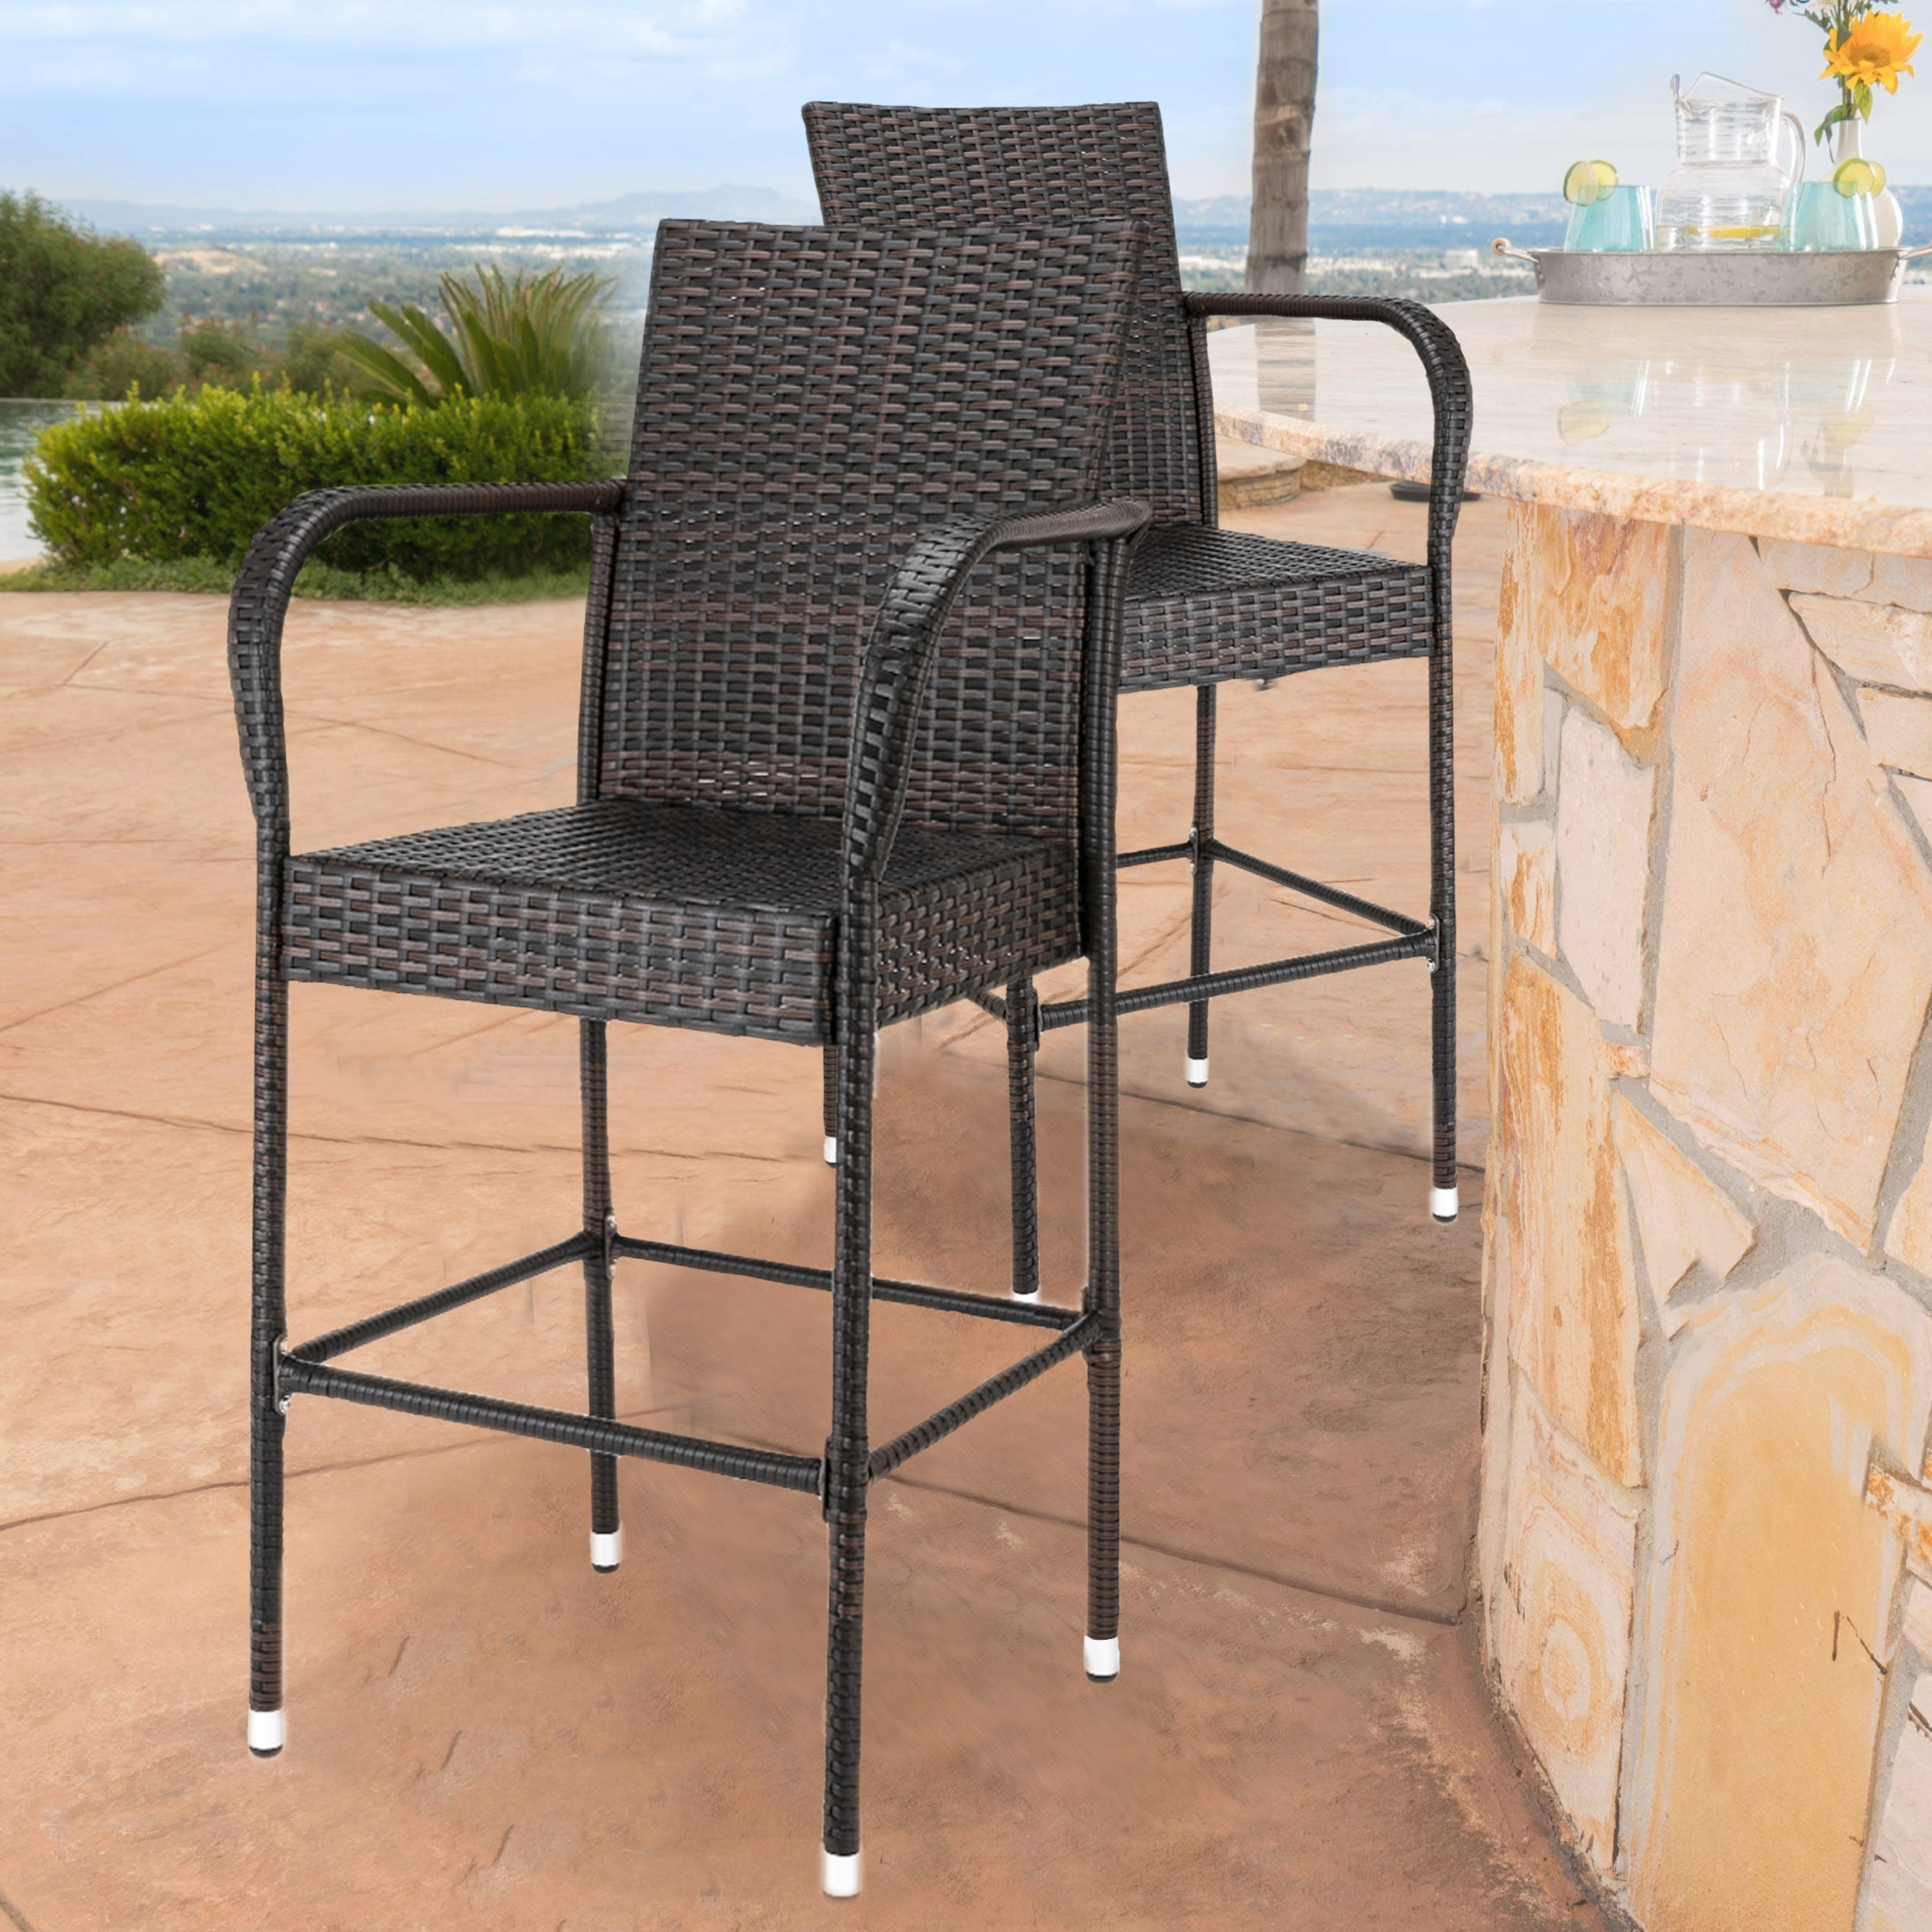 Outdoor Bar Stools 24 inches High, Outdoor Patio Furniture Wicker Rattan Bar Stool with Armrest and Footrest, Patio Bar Chairs for Garden Pool Lawn Backyard, Bar Stools with Back Sets of 2, W2099 - image 5 of 11